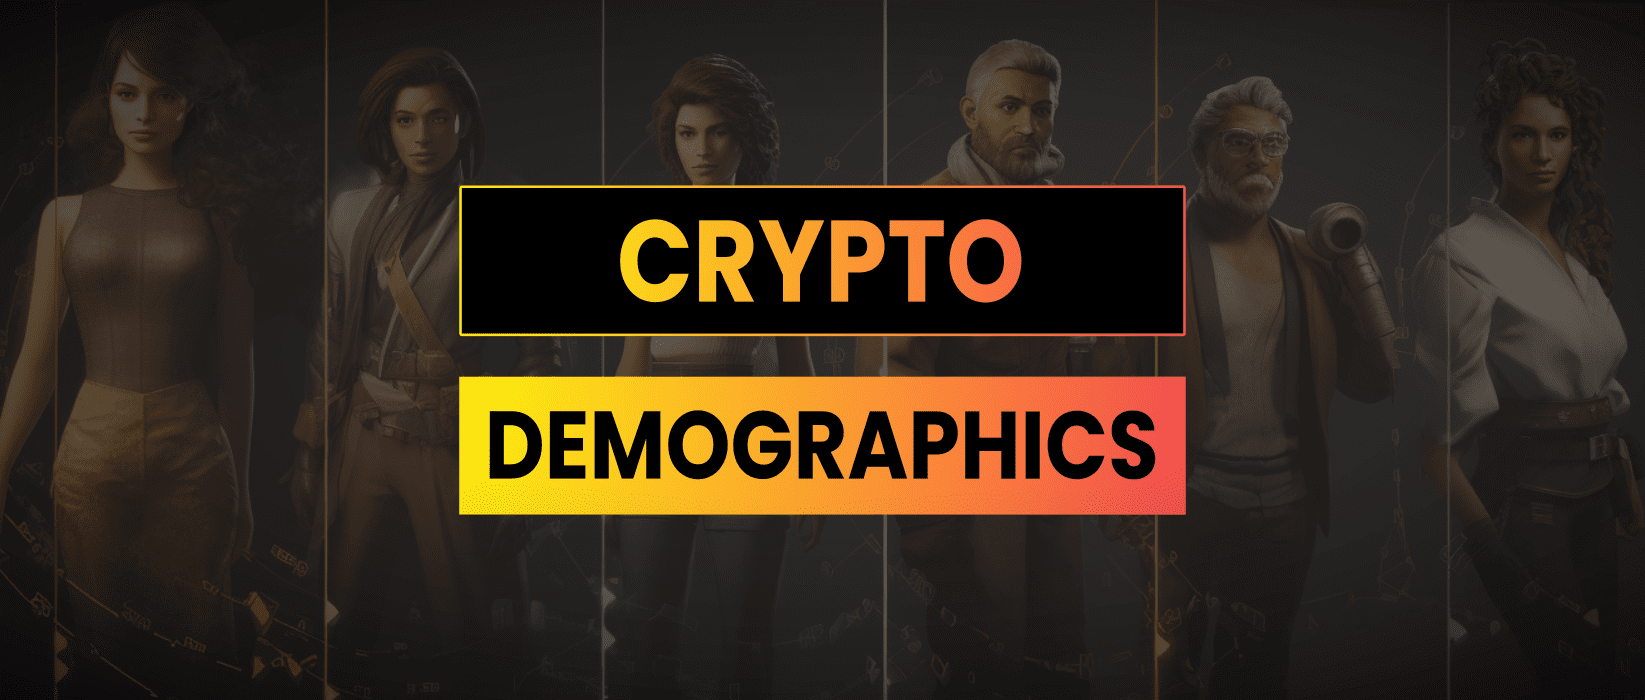 Biggest Misconceptions About Crypto User Demographics